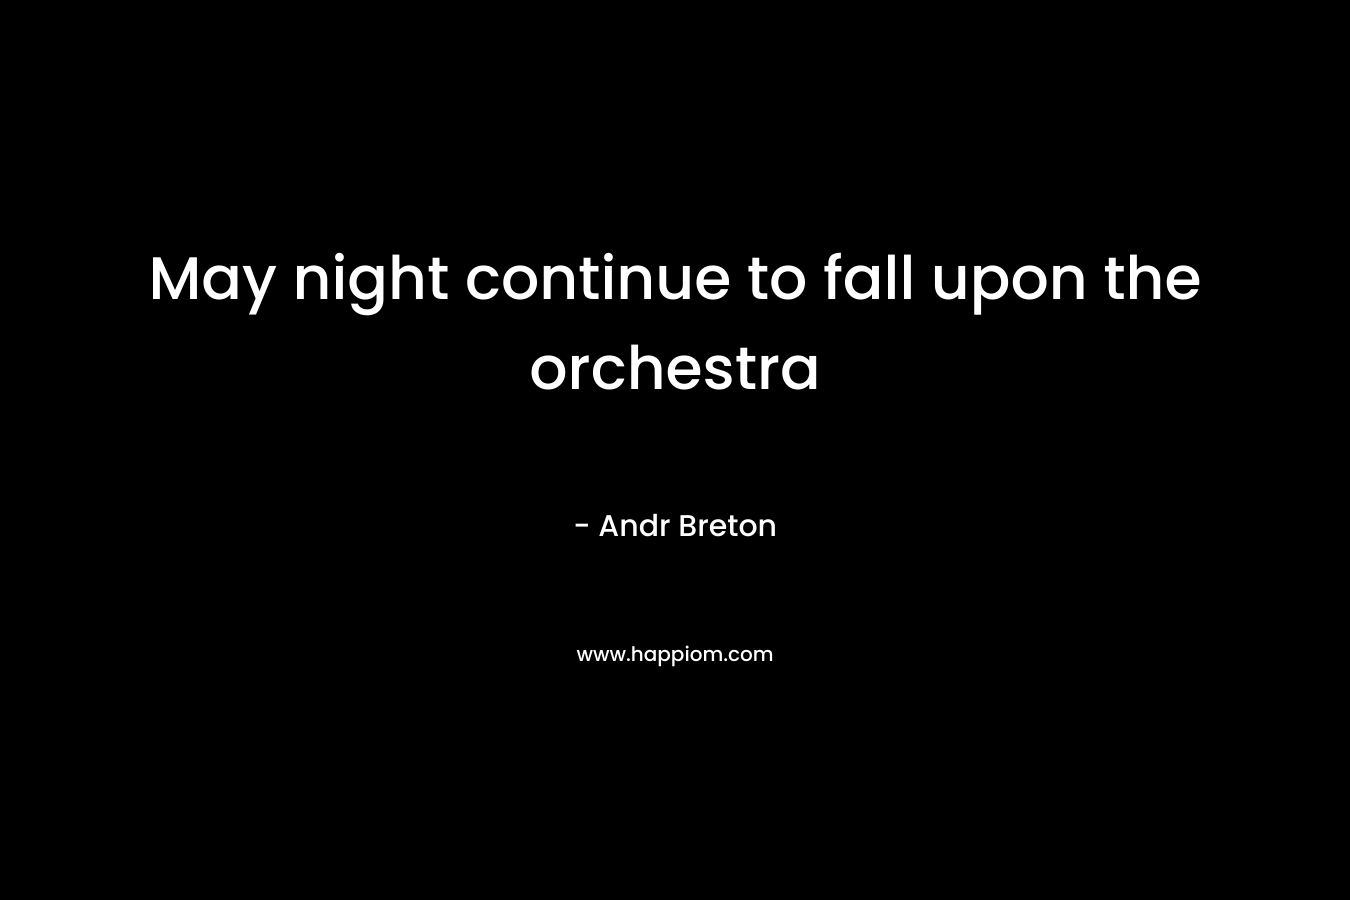 May night continue to fall upon the orchestra